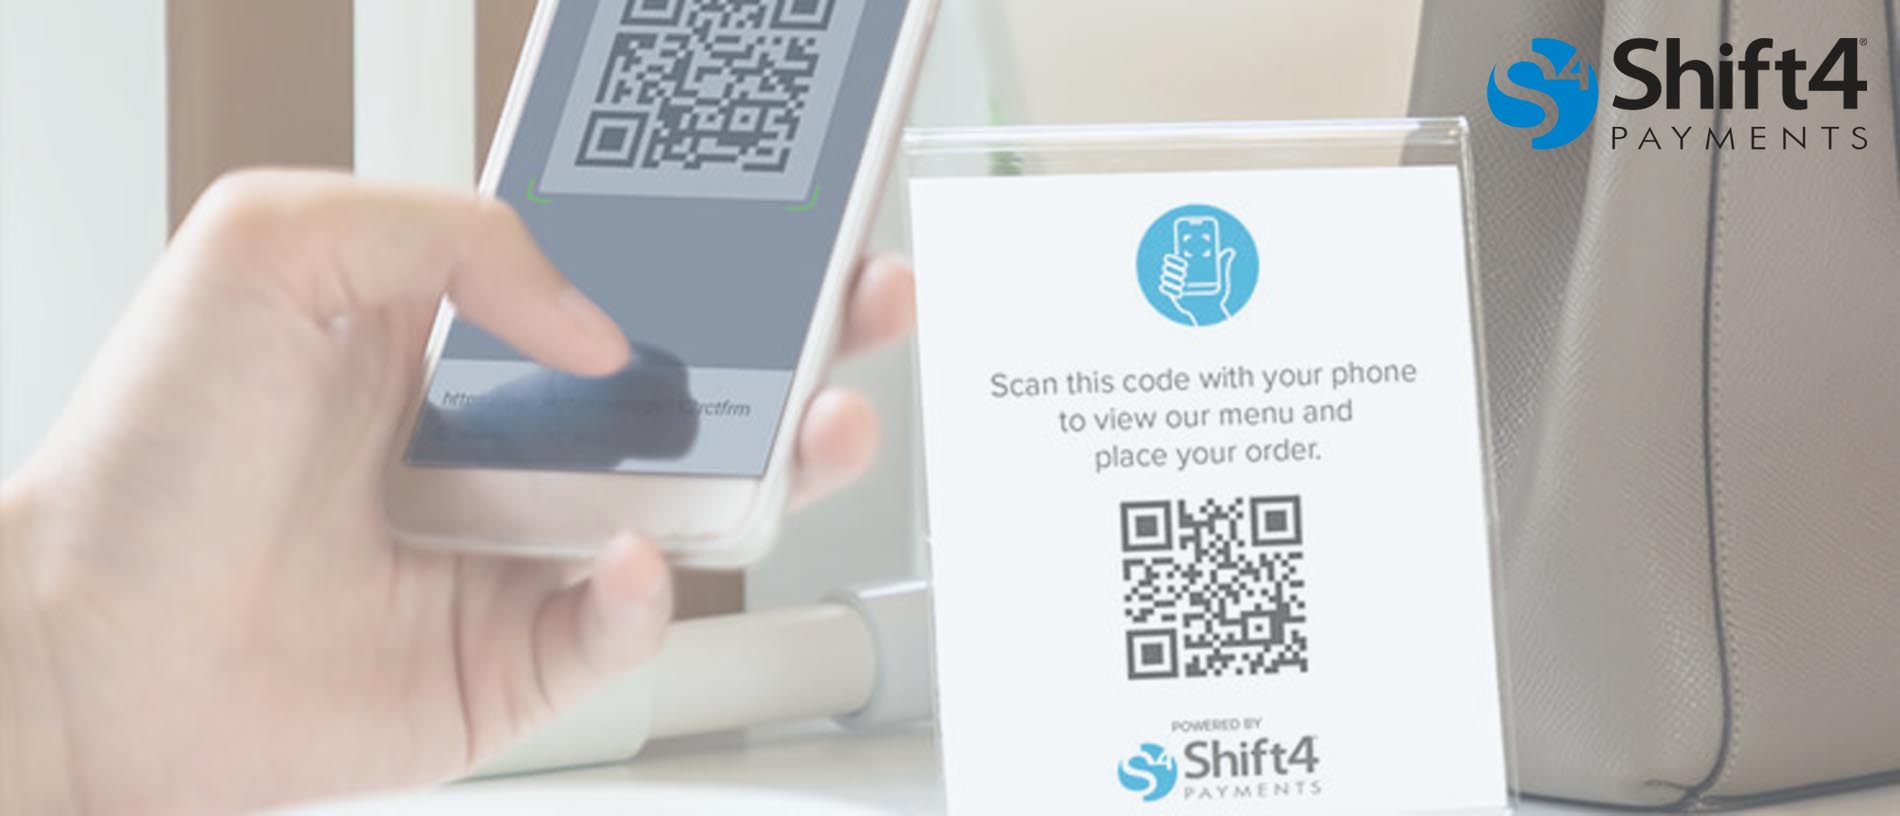 AnyPOSconnector shift4 payments image